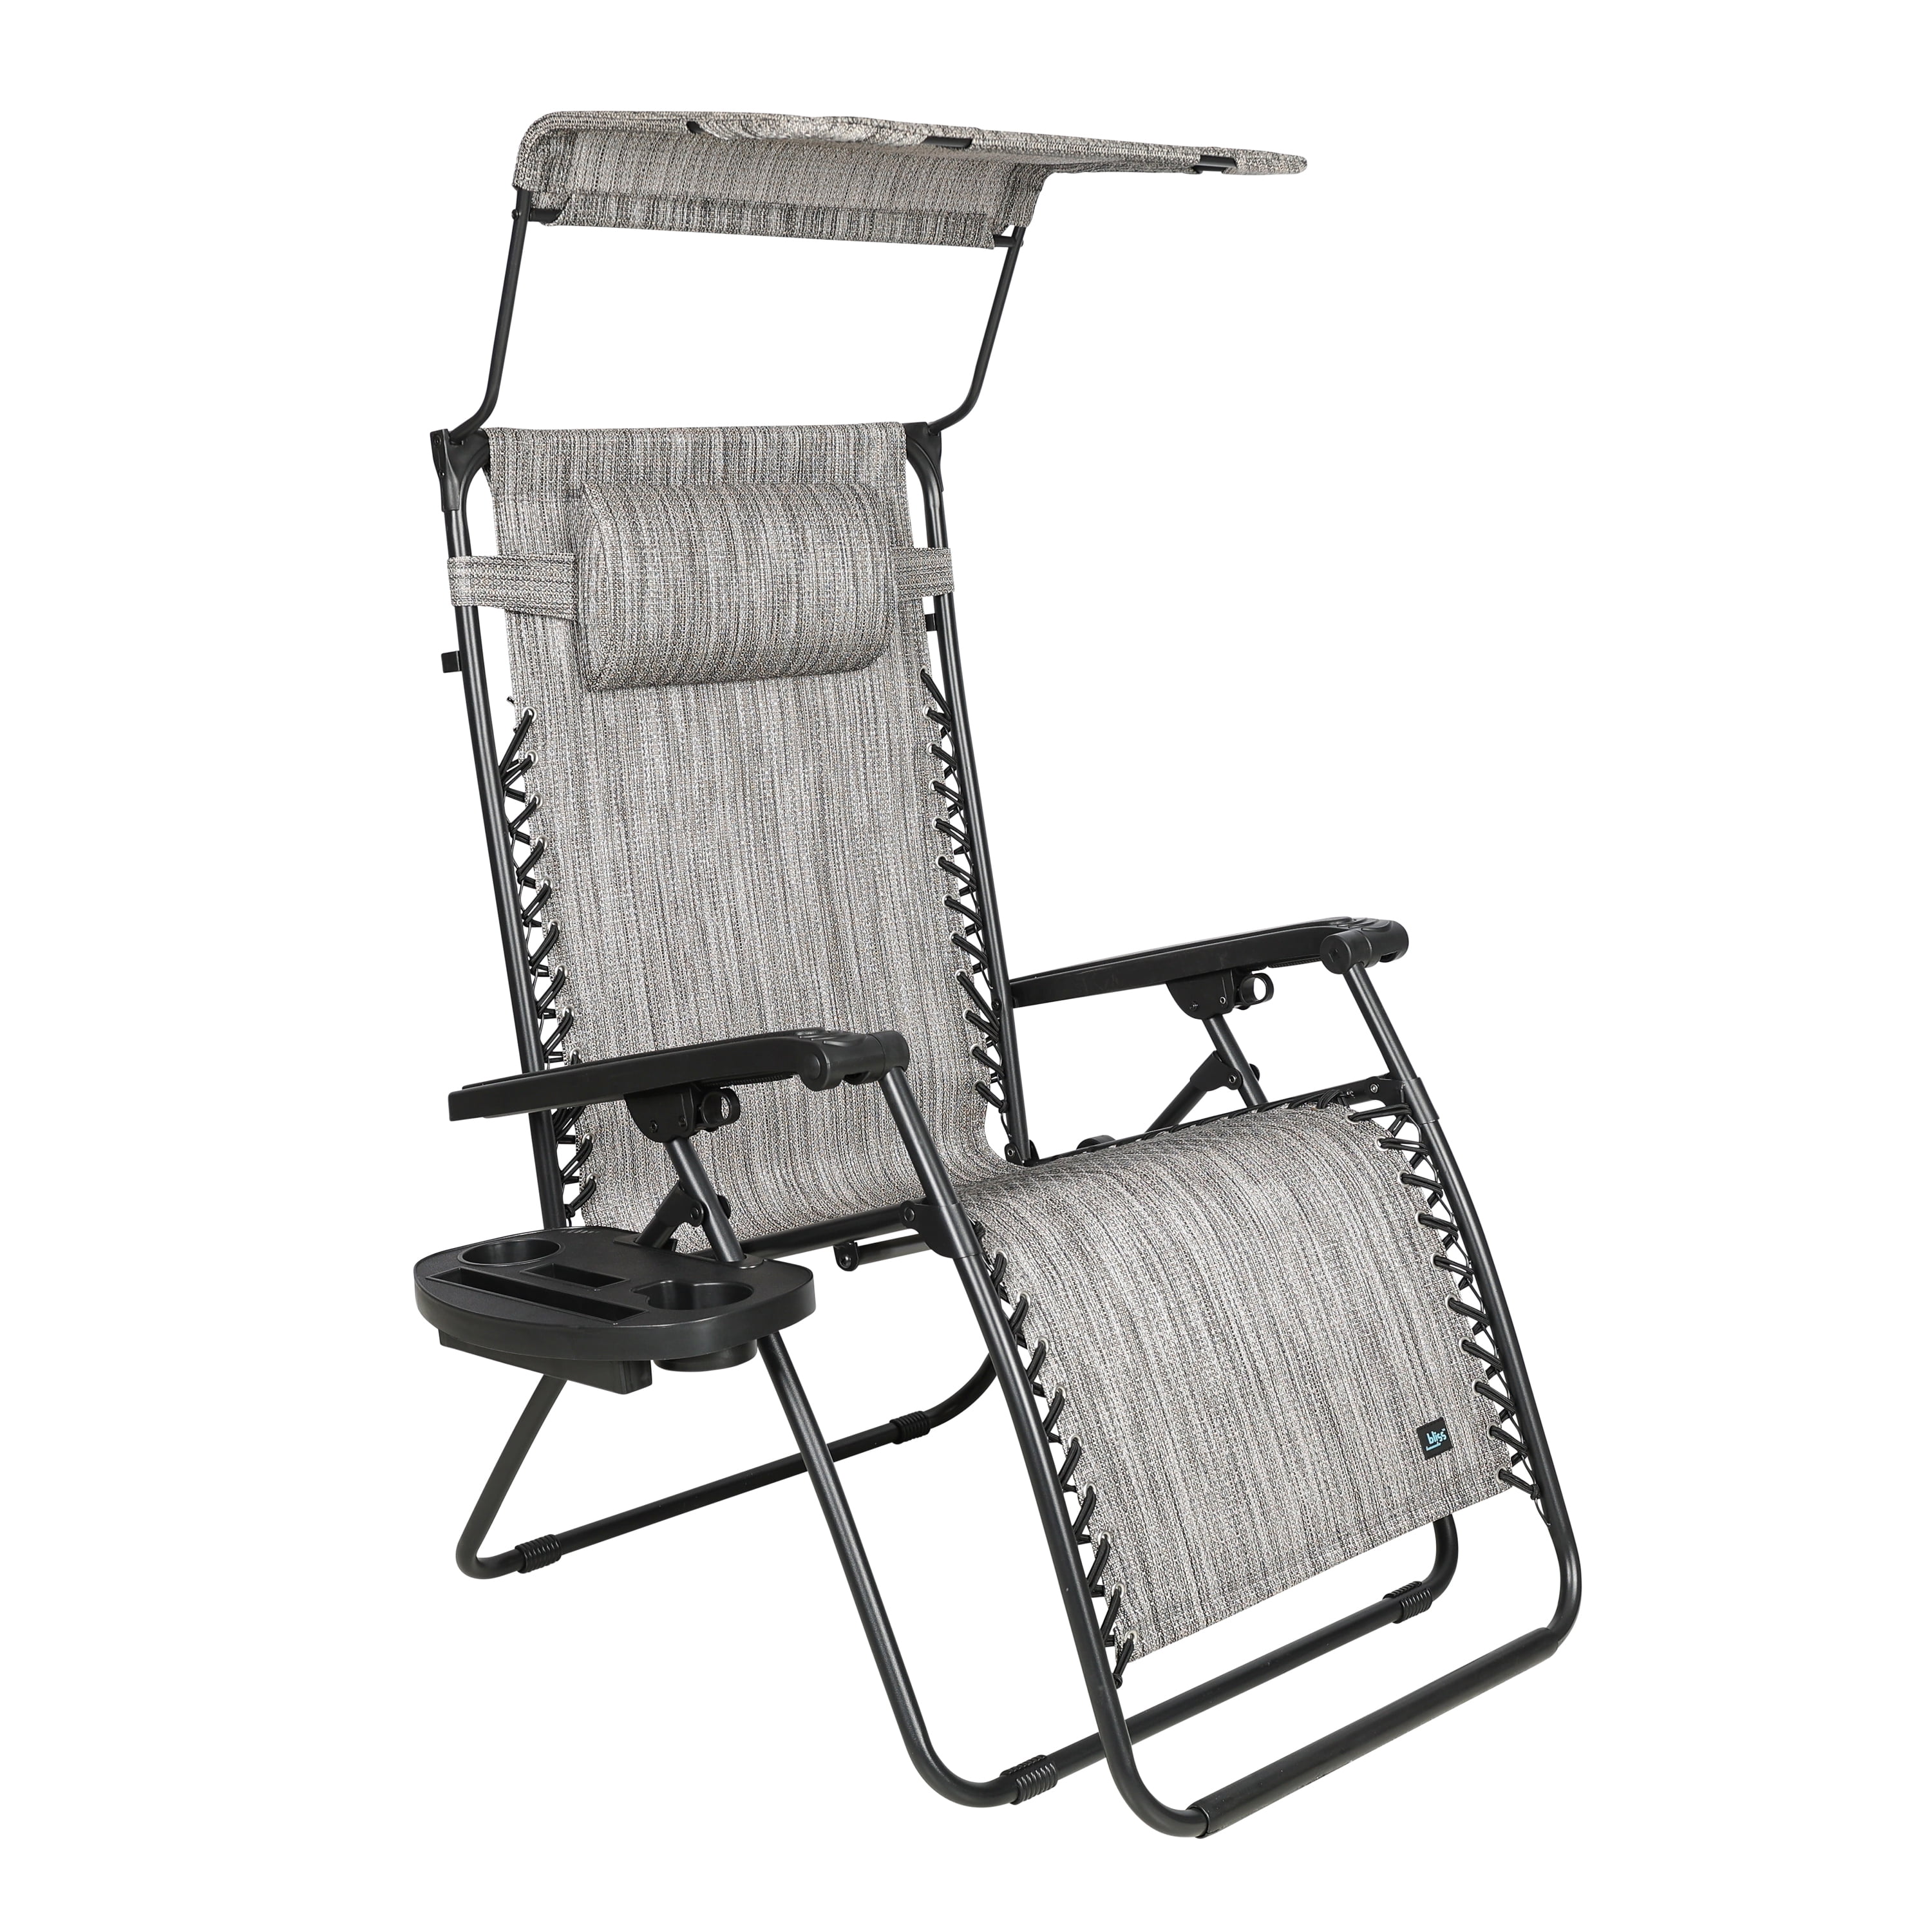 Bliss Hammocks 30" Wide Zero Gravity Chair W/ Canopy, Pillow, & Drink Tray - Platinum - image 1 of 8